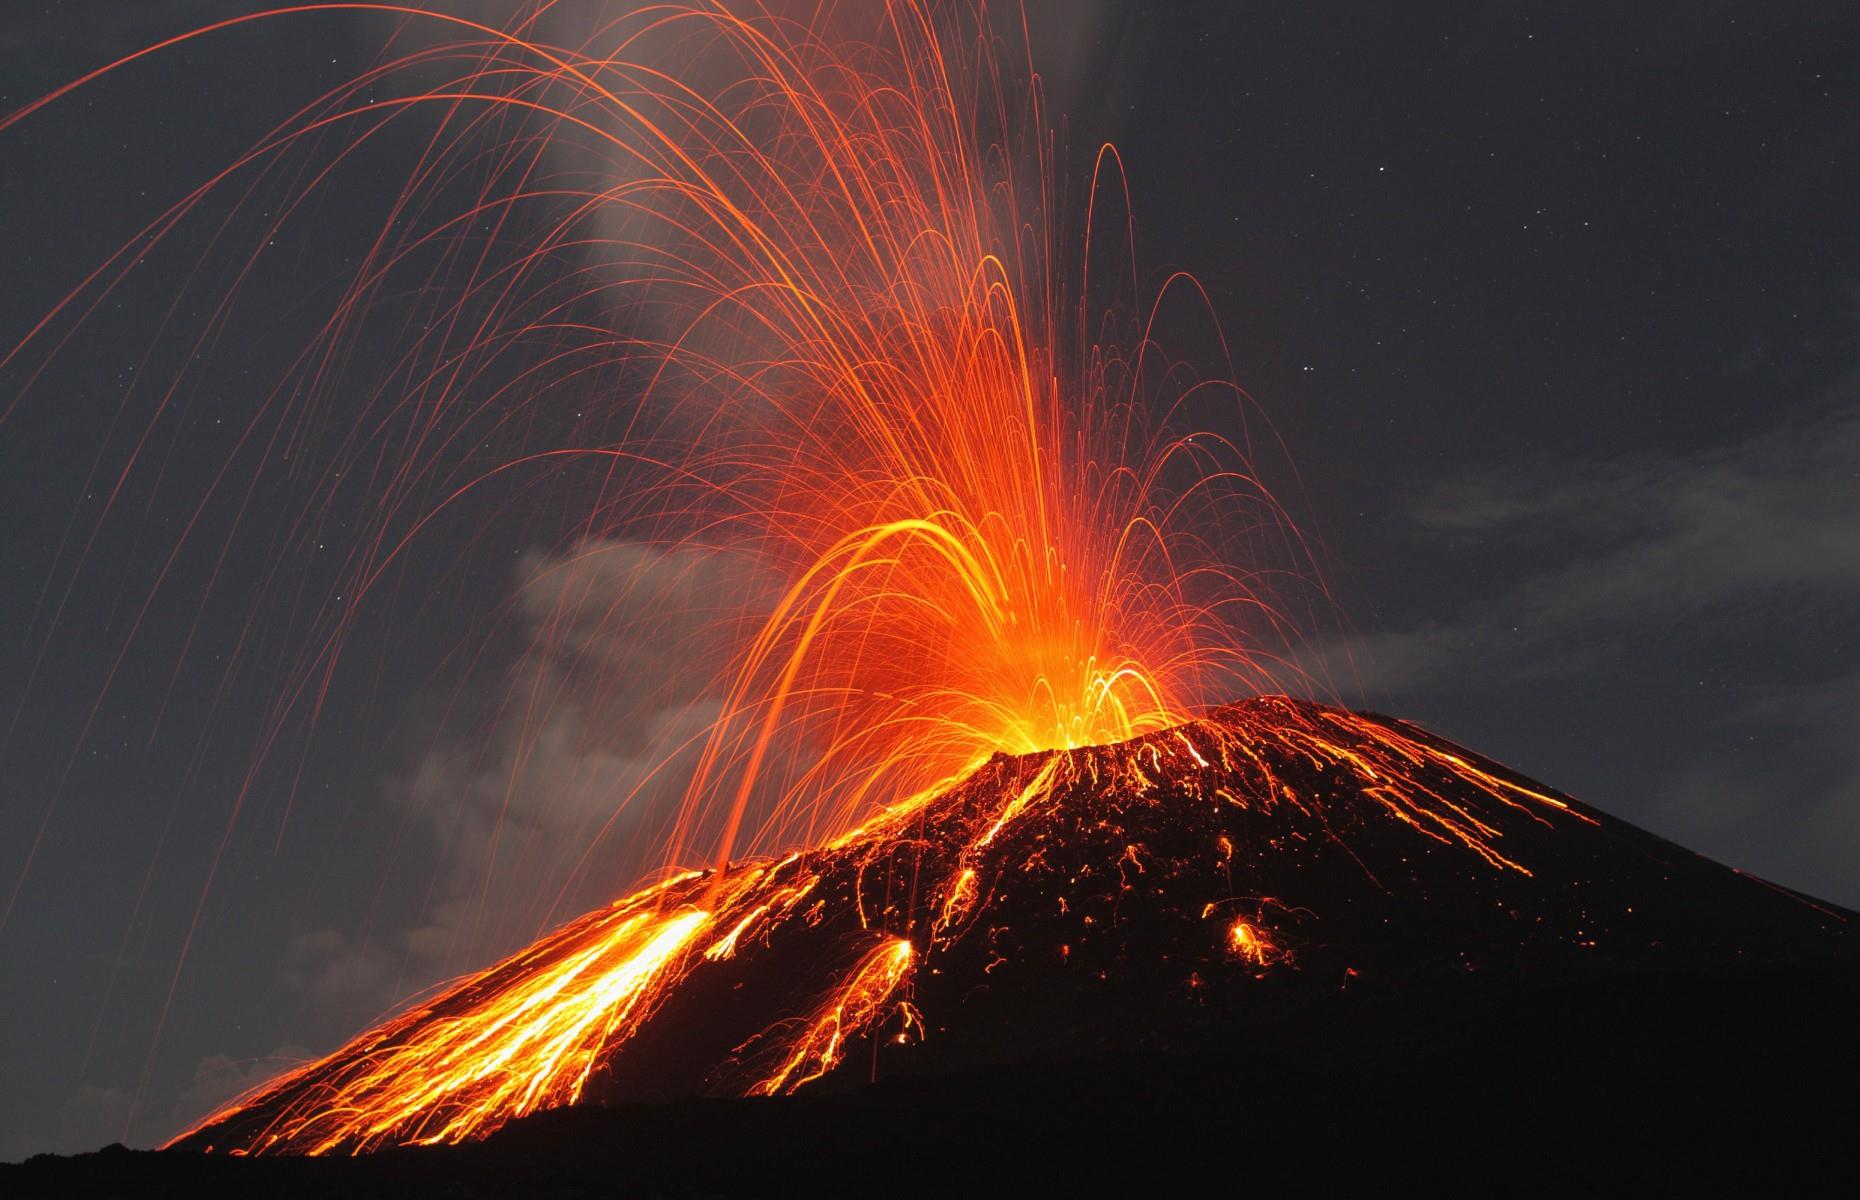 Since the end of the 20th century there has been sporadic volcanic activity at Anak Krakatoa, including in 2010 (pictured). But in June 2018 a new and more problematic eruptive phase was observed and on 22 December 2018 it erupted. A huge part of the volcano collapsed and caused a tsunami that killed 426 people, with more than 7,000 injured.